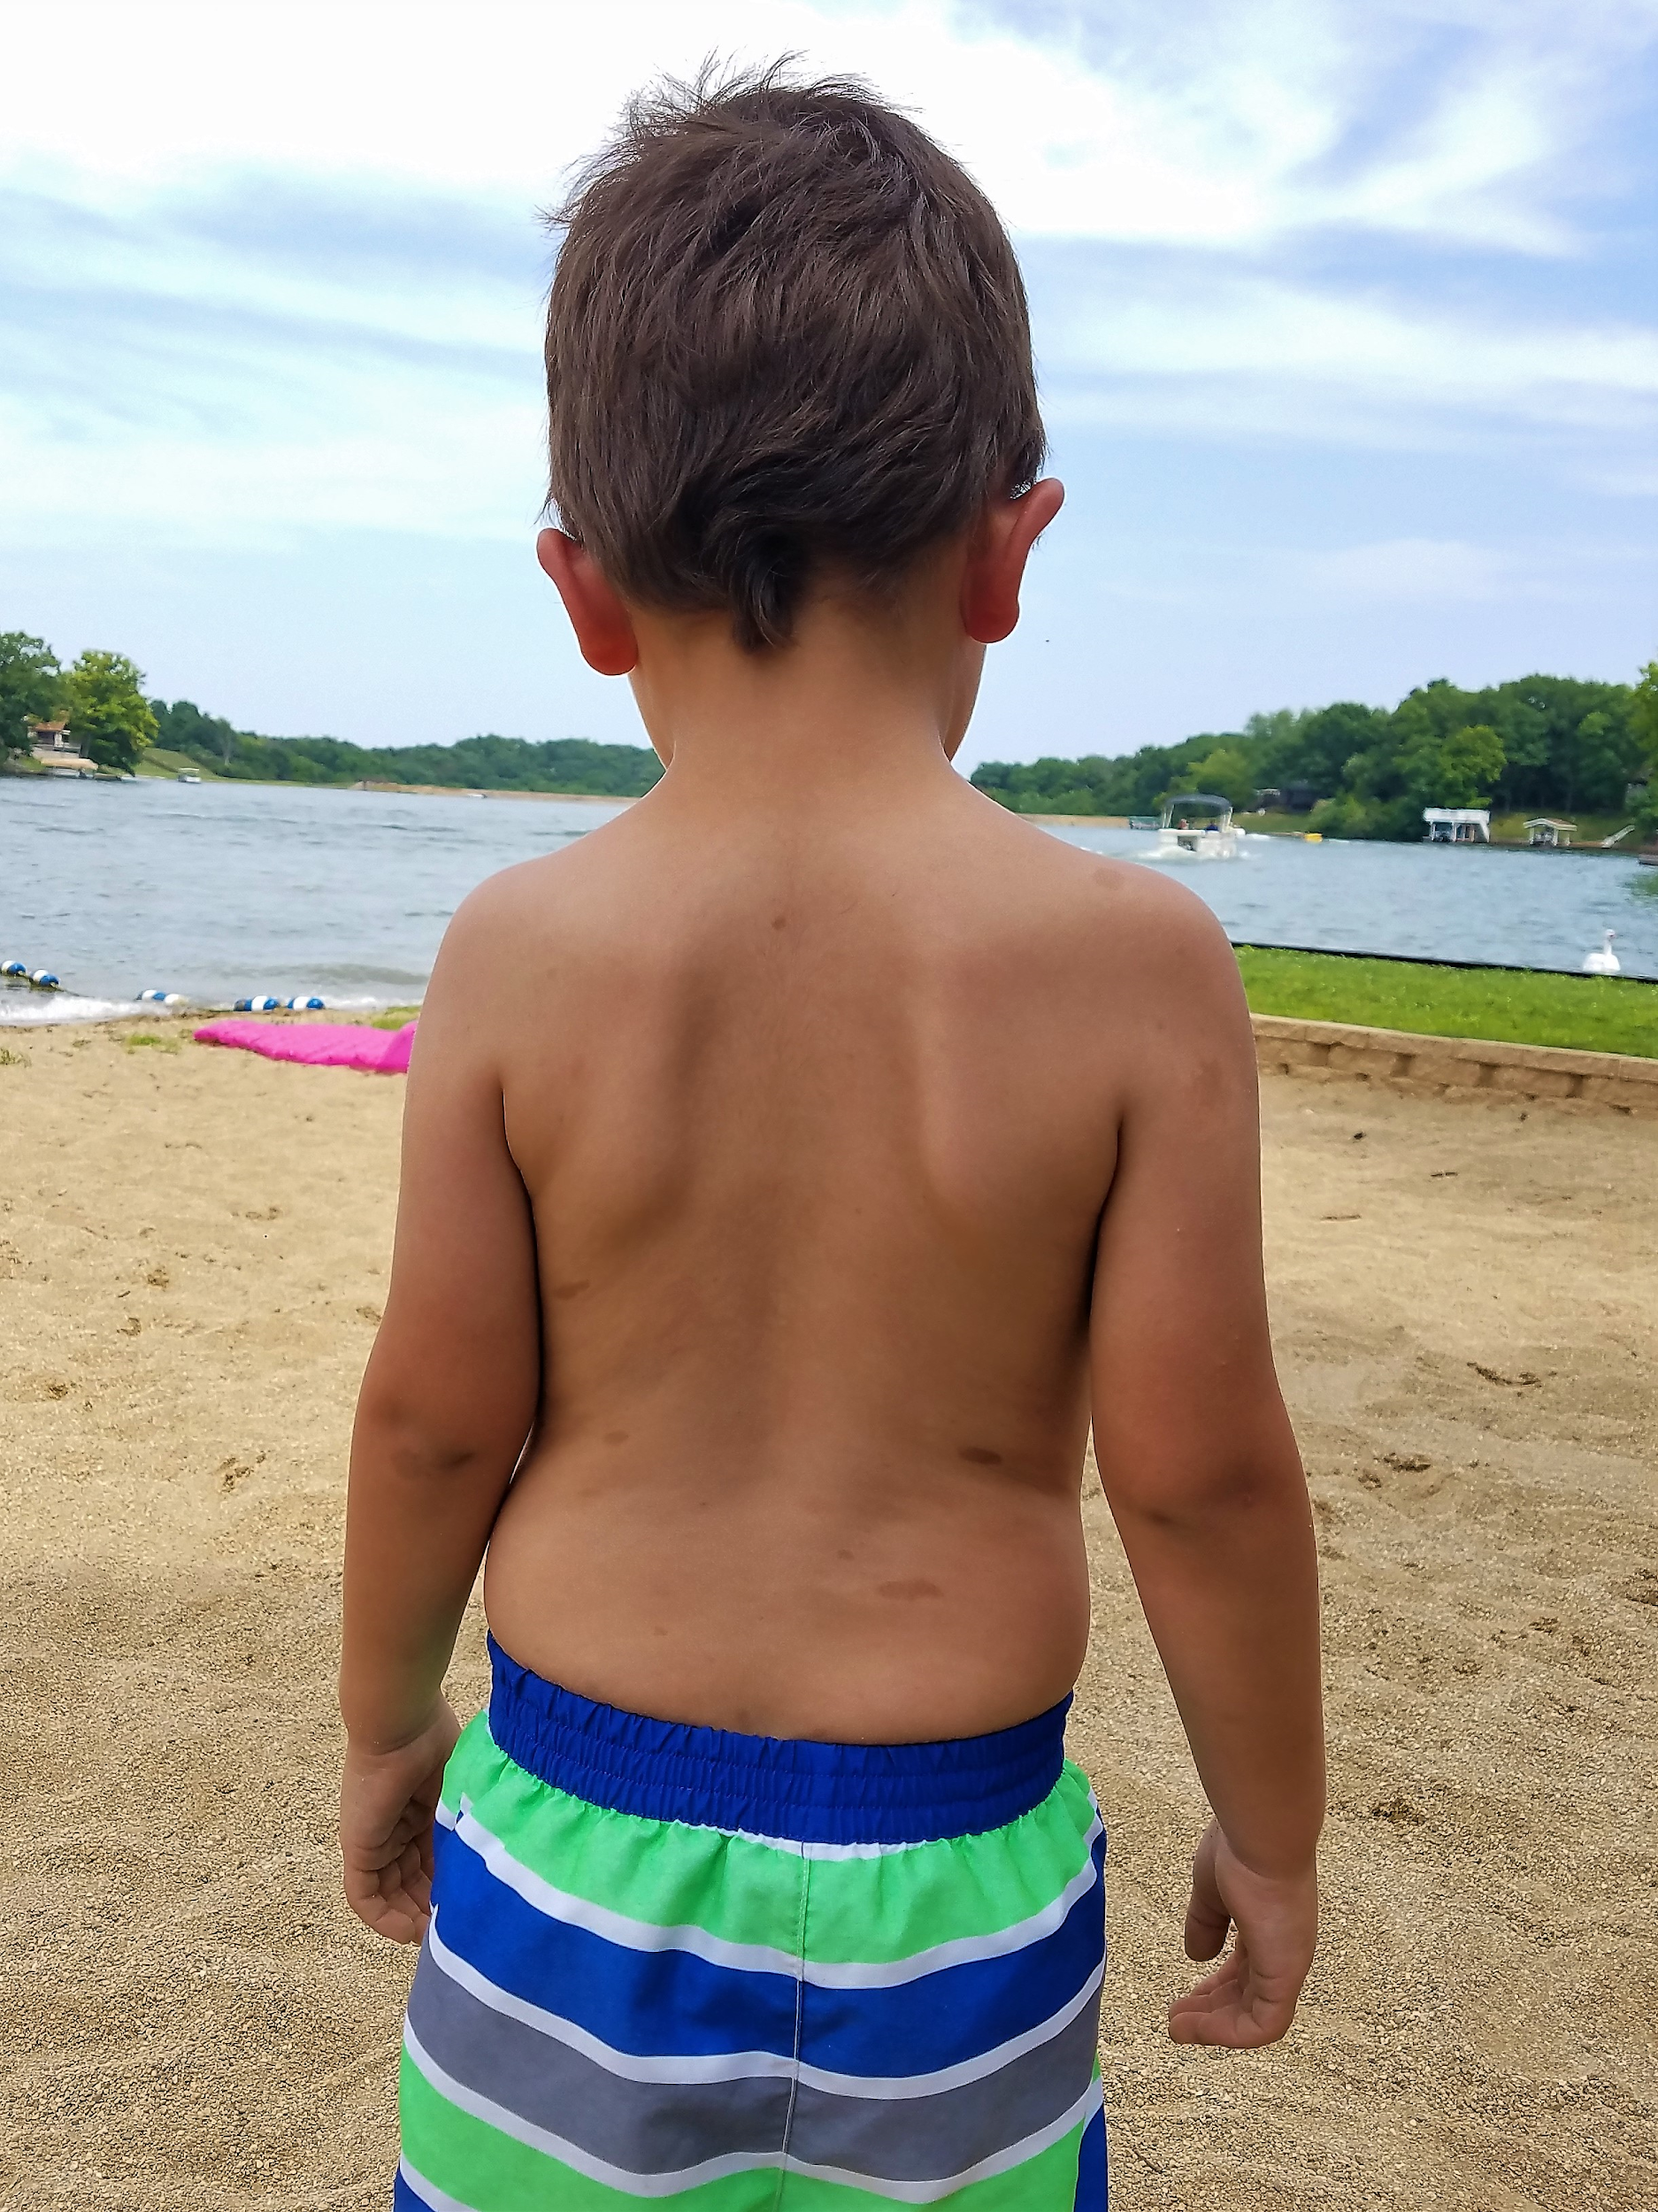 A child with darker oval birthmarks scattered across his torso and arms.